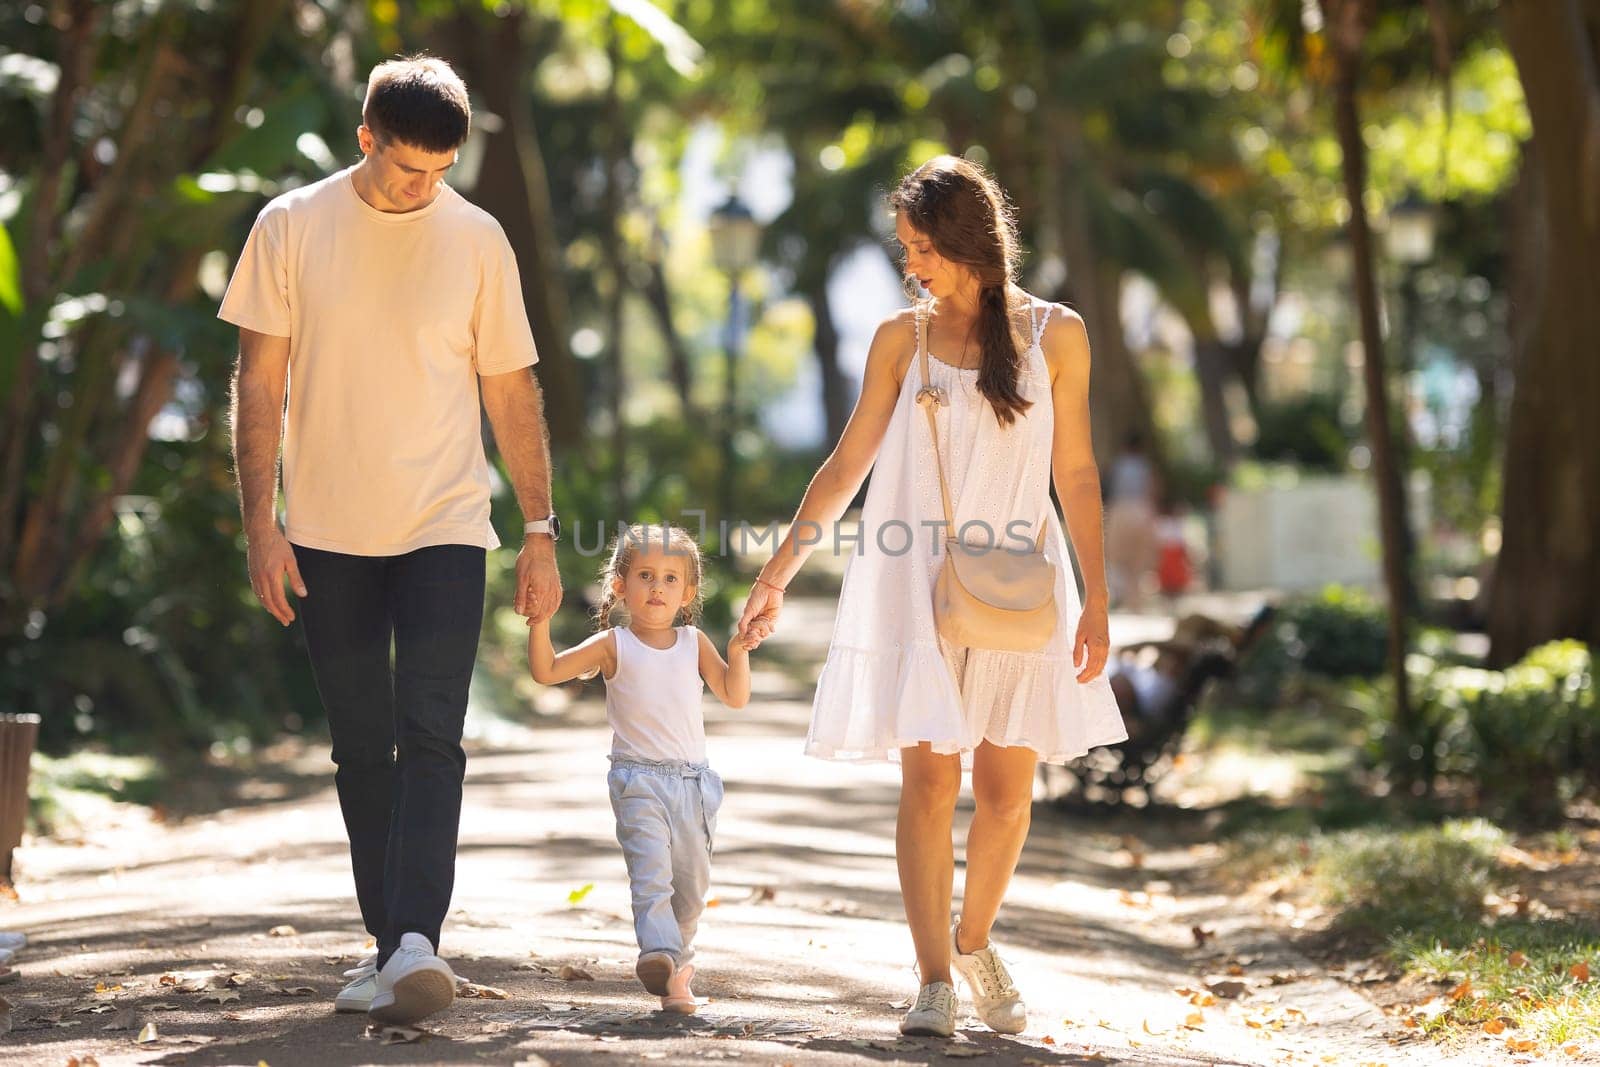 Young family walking in a summer park holding hands. Mid shot